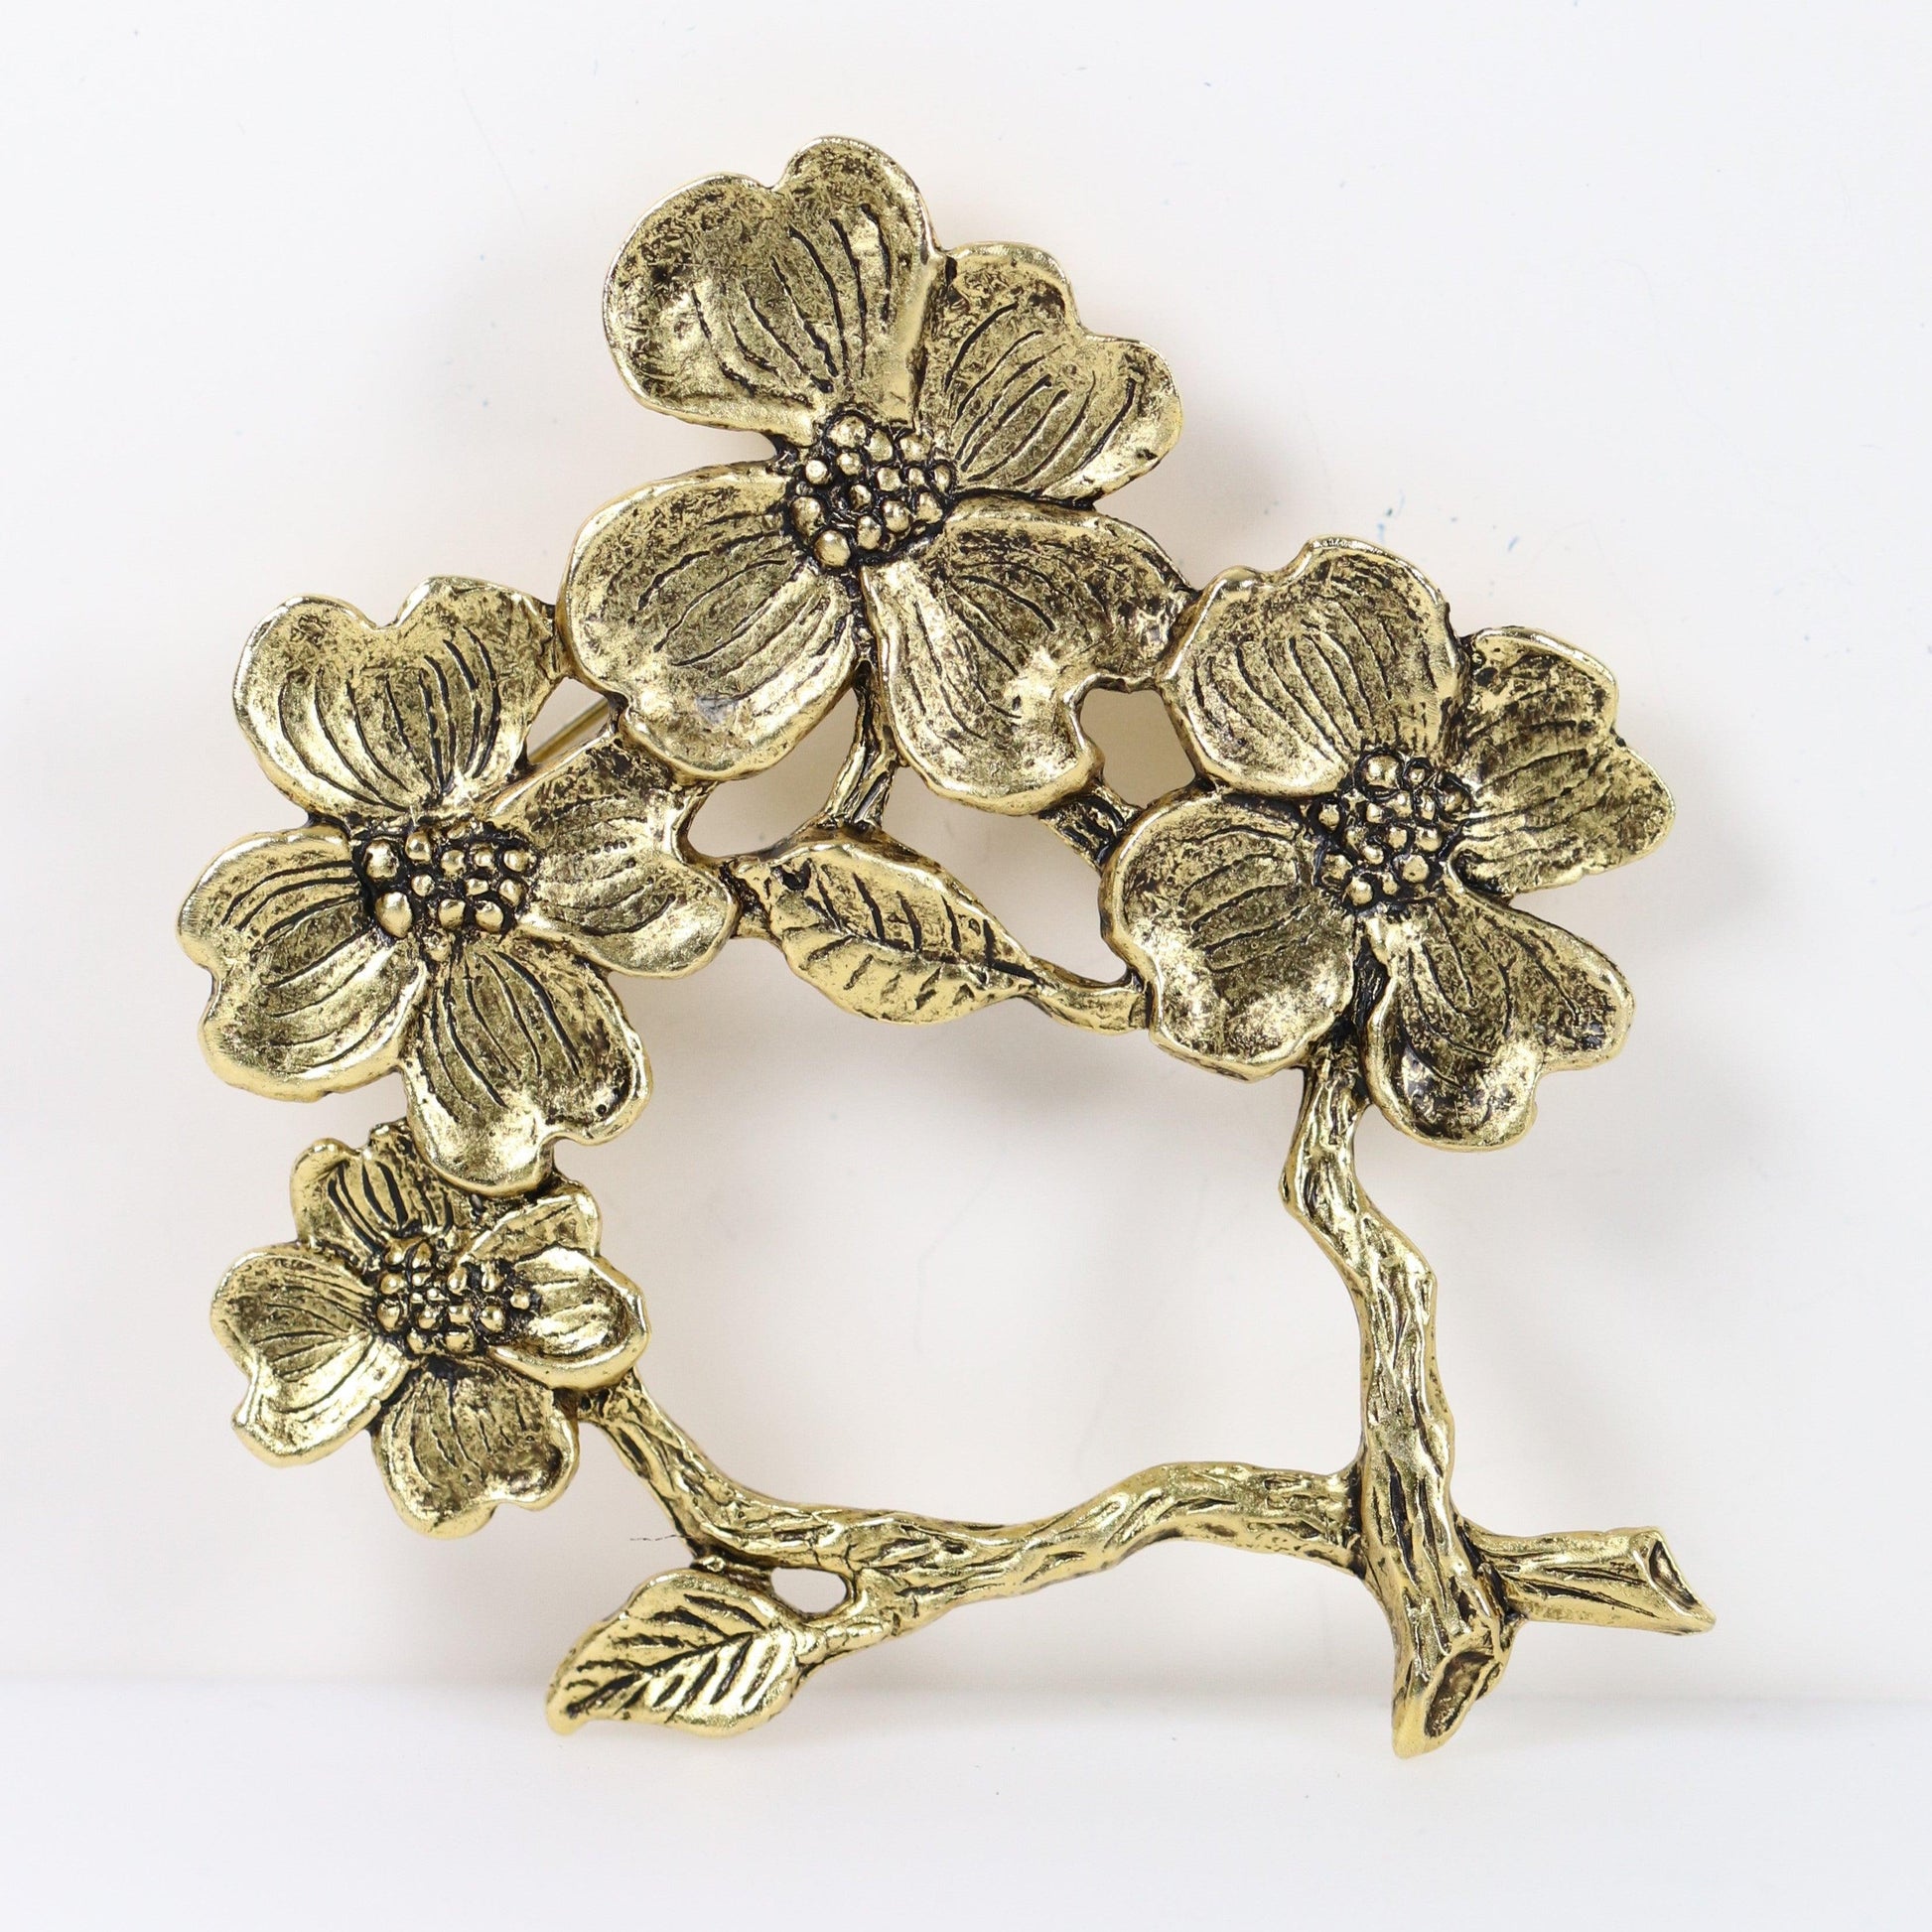 Vintage Peggy Yunque Jewelry | Gold Tone Dogwood Floral Brooch - Carmel Fine Silver Jewelry